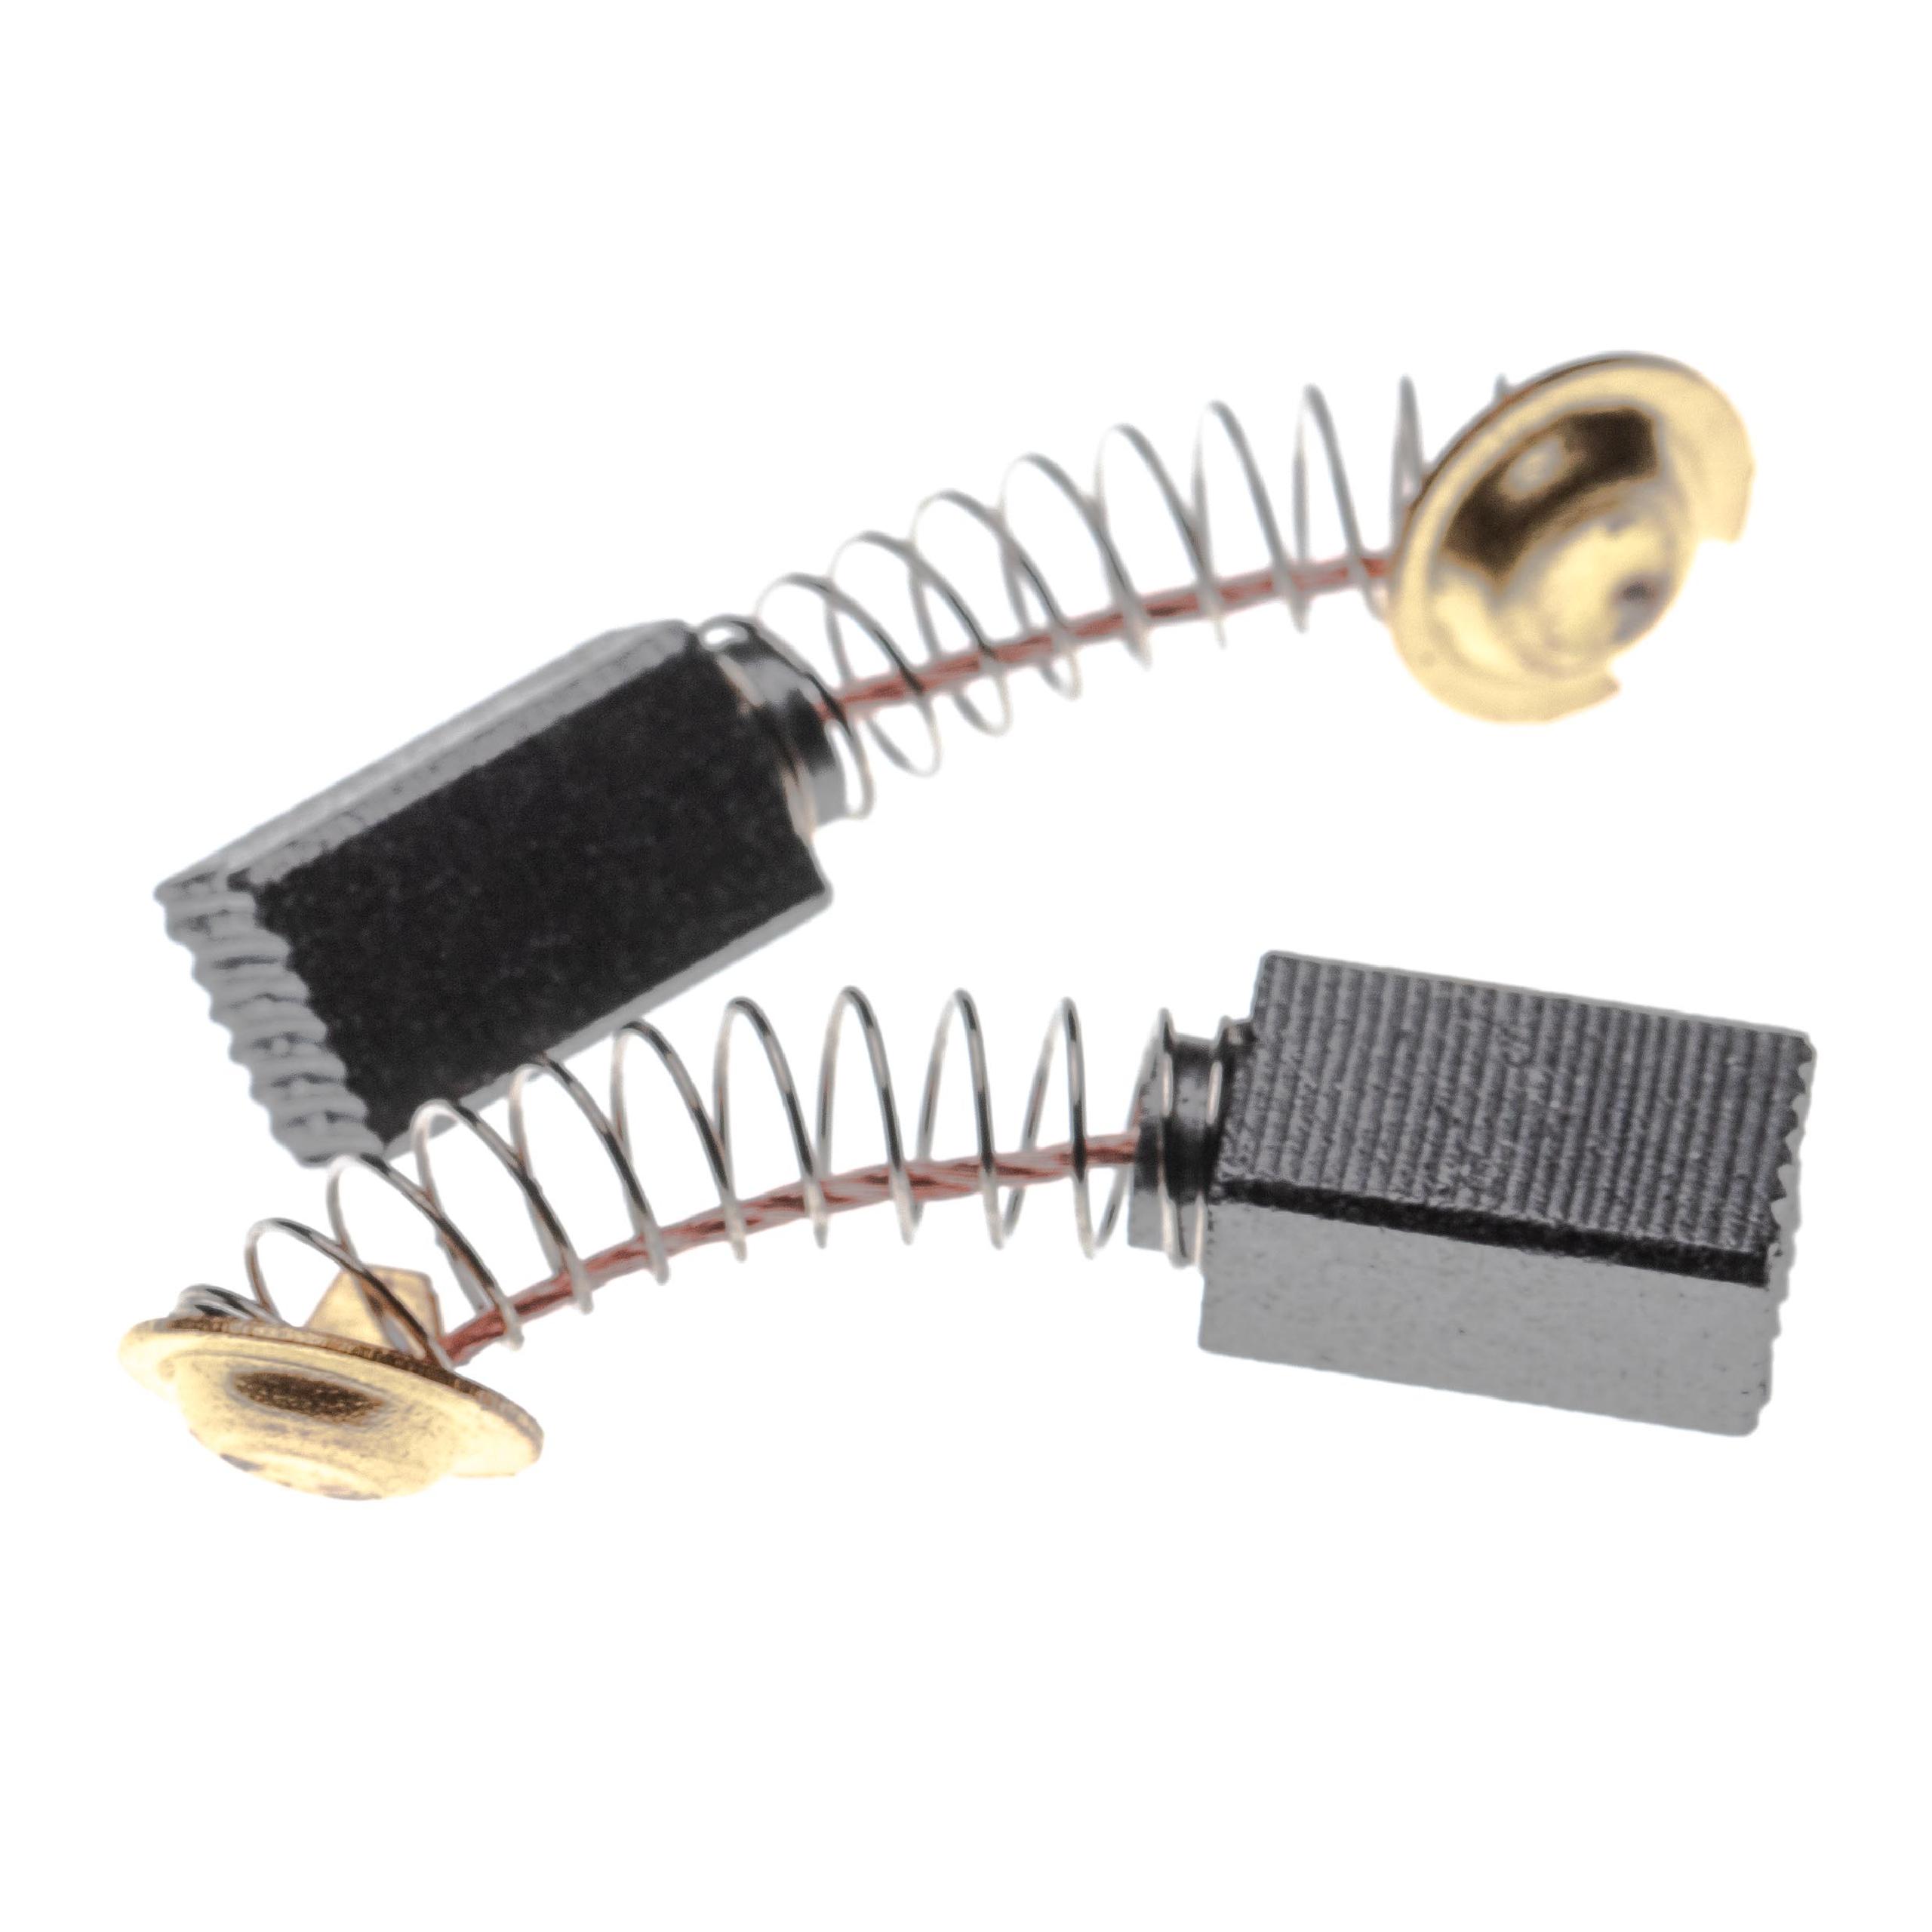 2x Carbon Brush as Replacement for Hitachi 999-021, 999021 Electric Power Tools + Spring, 6.5 x 7.5 x 12.5mm